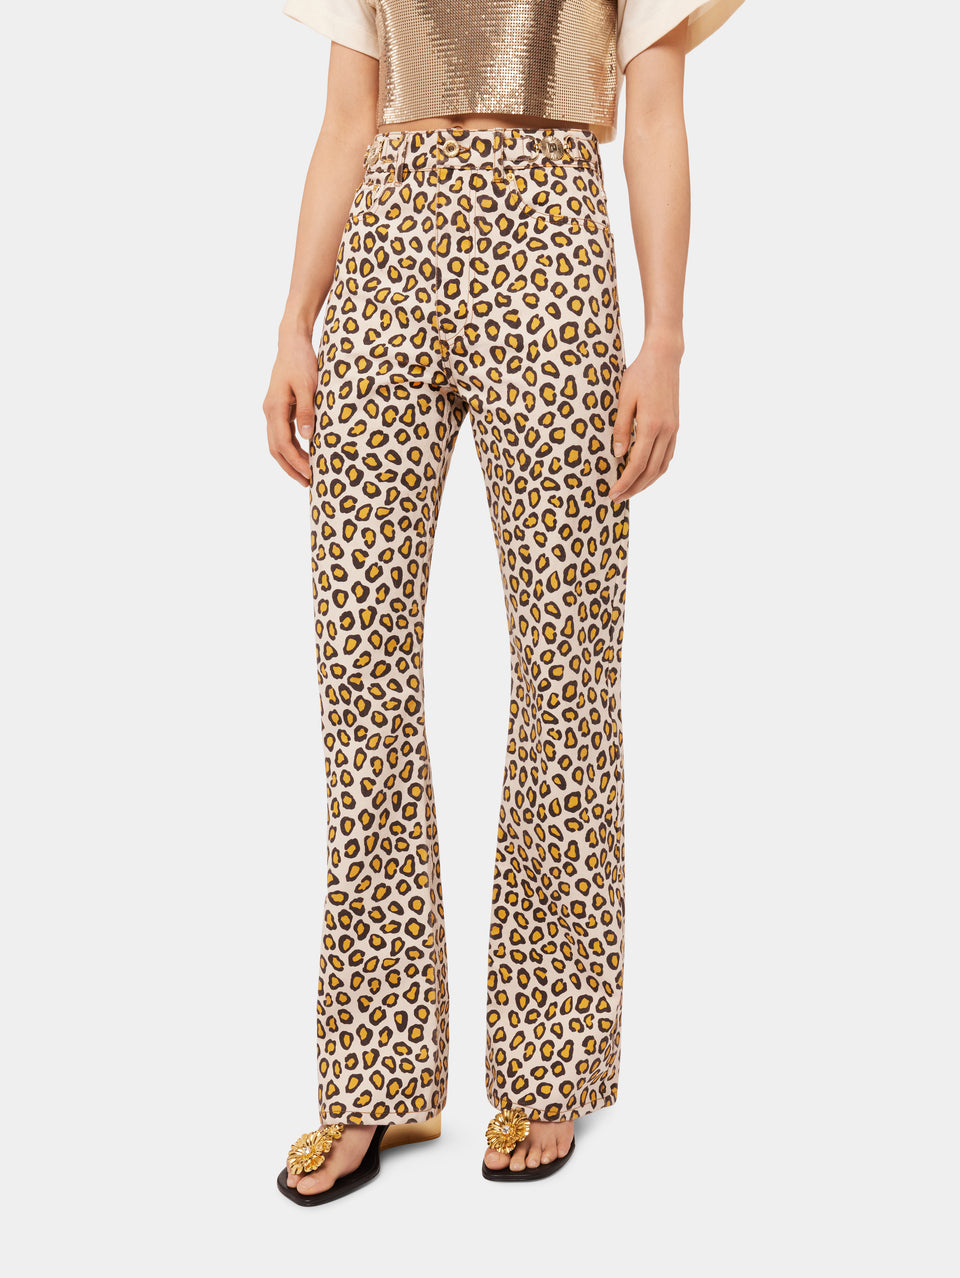 LEOPARD PRINTED FLARE JEANS